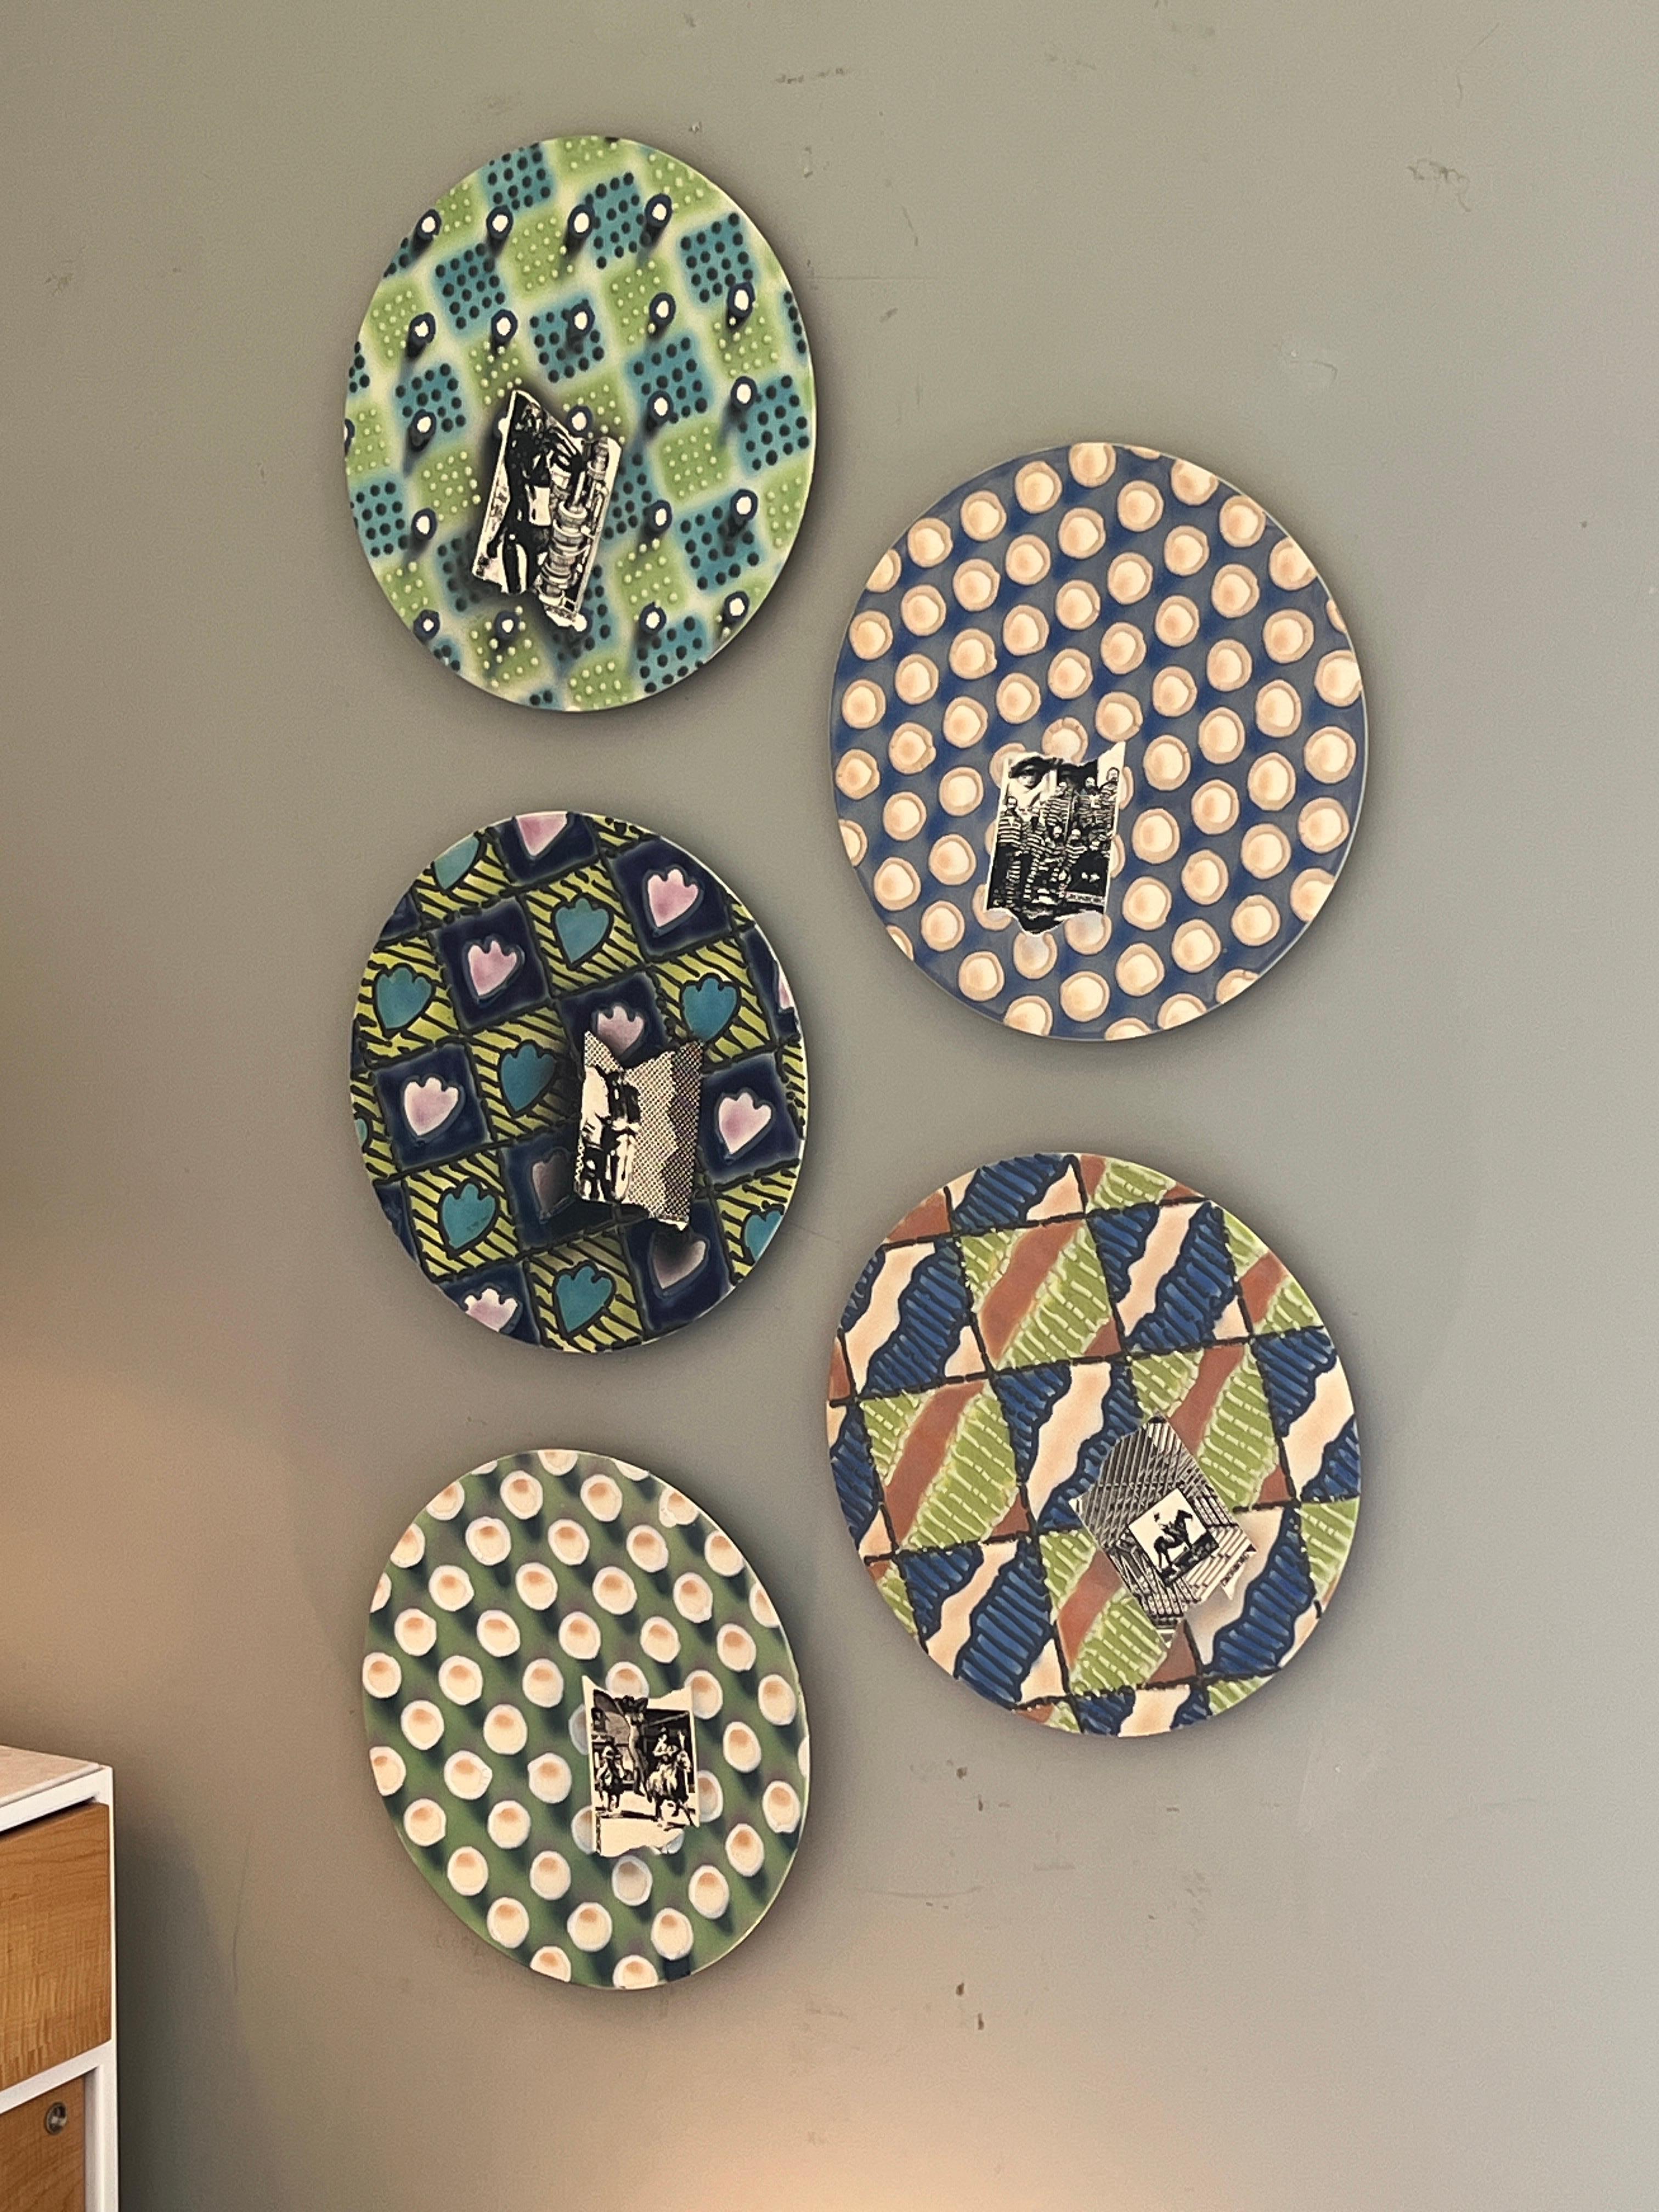 Ceramic chargers with photo transfer by prolific California artist Erik Grönborg . Arriving in the United States from Denmark in 1959, Grönborg headed straight away to California where he's been a trailblazer in the creation of Funk ceramics, cast